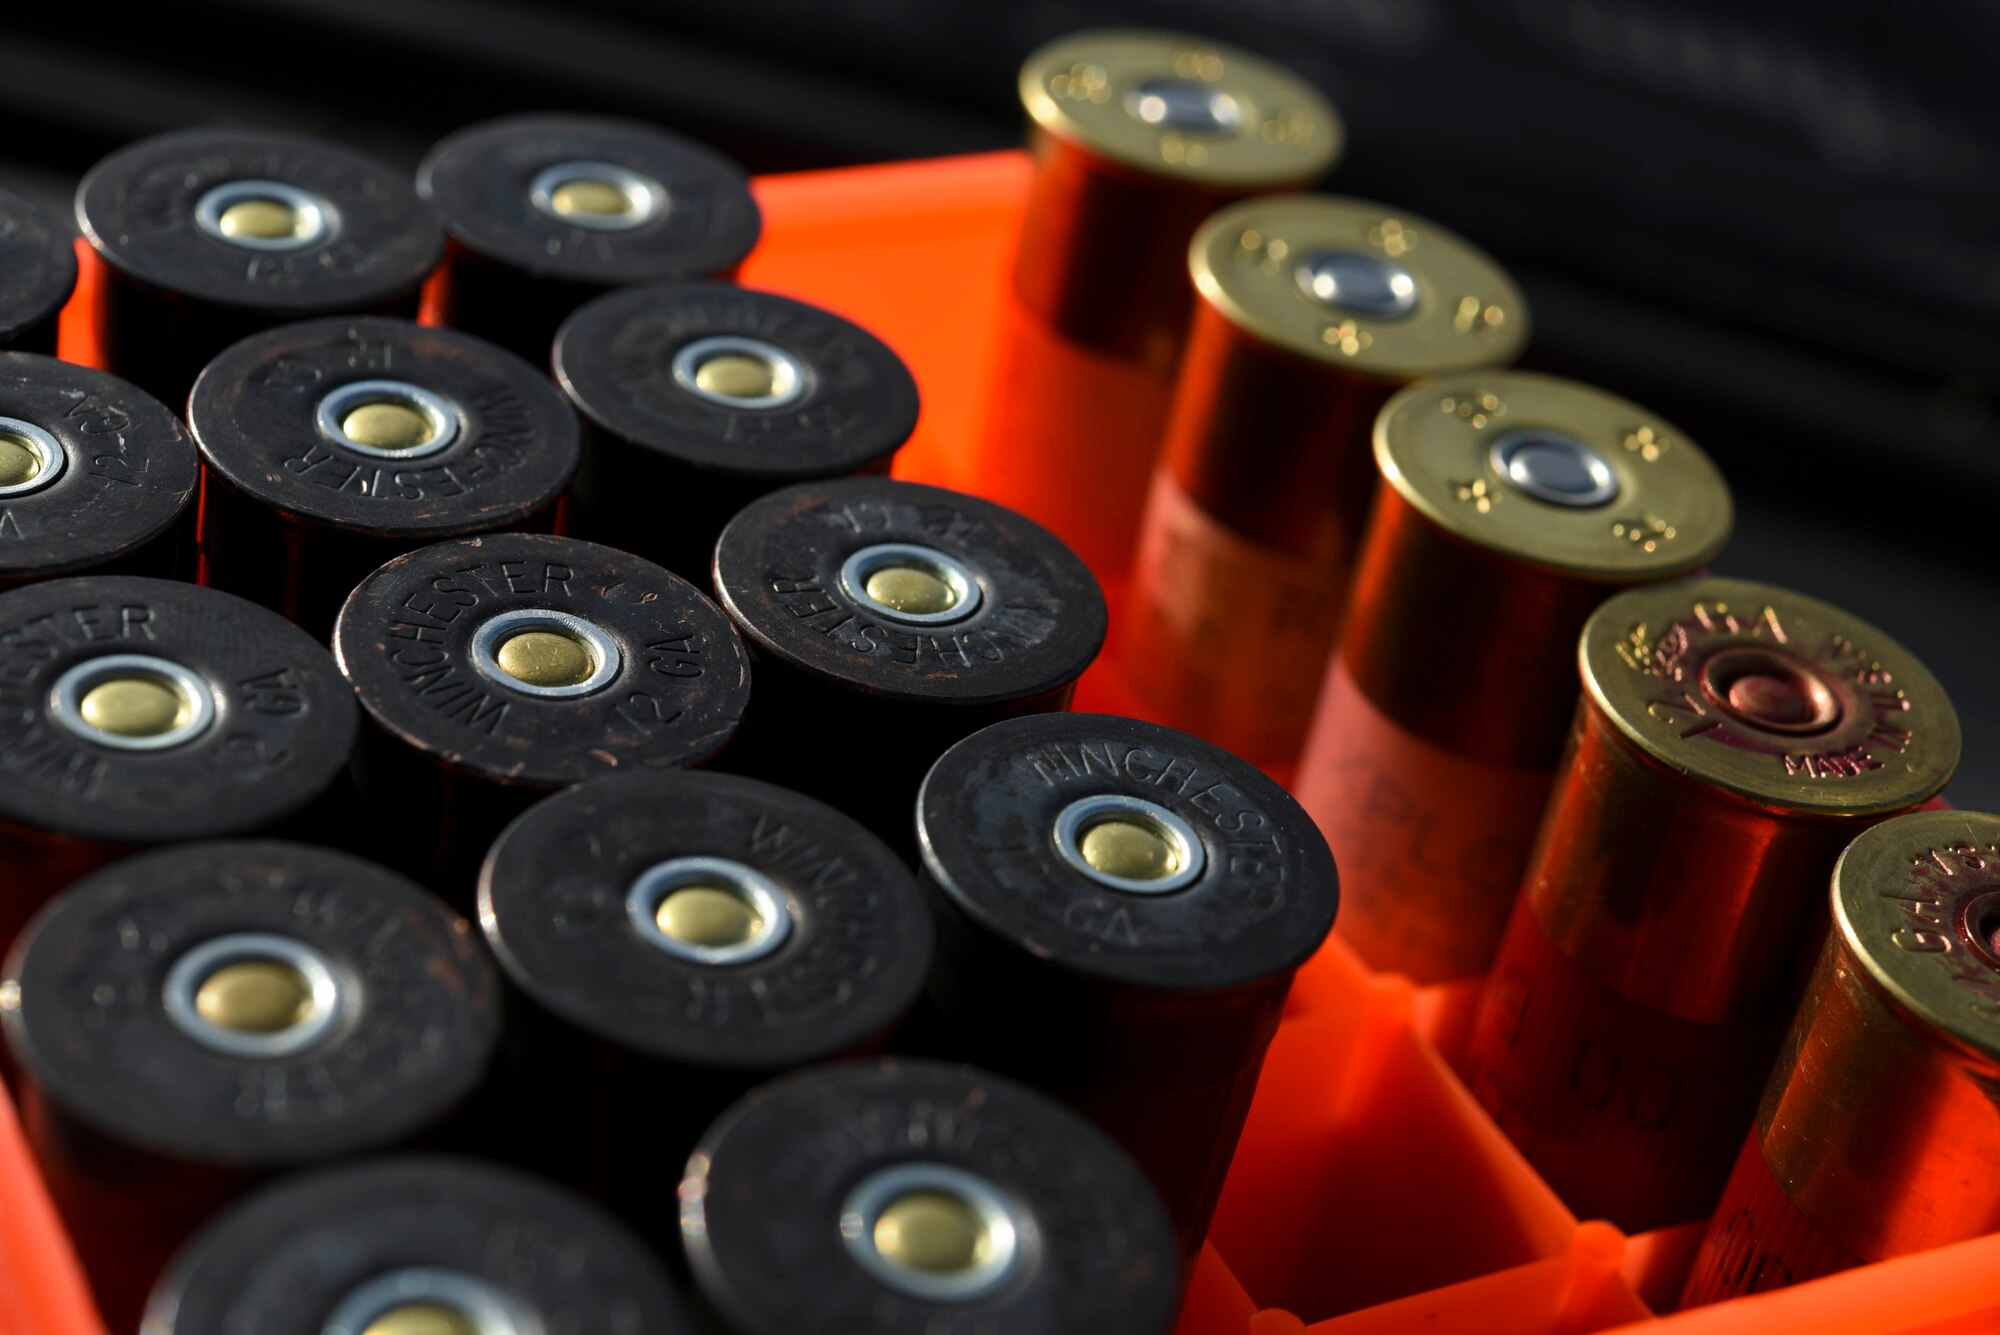 Shotgun ammunition sits inside a car parked on the flightline at Kunsan Air Base, Republic of Korea, Jan. 3, 2017. The ammo is used in the Bird/wildlife Aircraft Striking Hazard program, which is designed to deter wildlife that could cause significant damage to aircraft. Members of the program use a variety of tools from noise cannons and predator calls to shotguns. (U.S. Air Force photo by Senior Airman Michael Hunsaker)